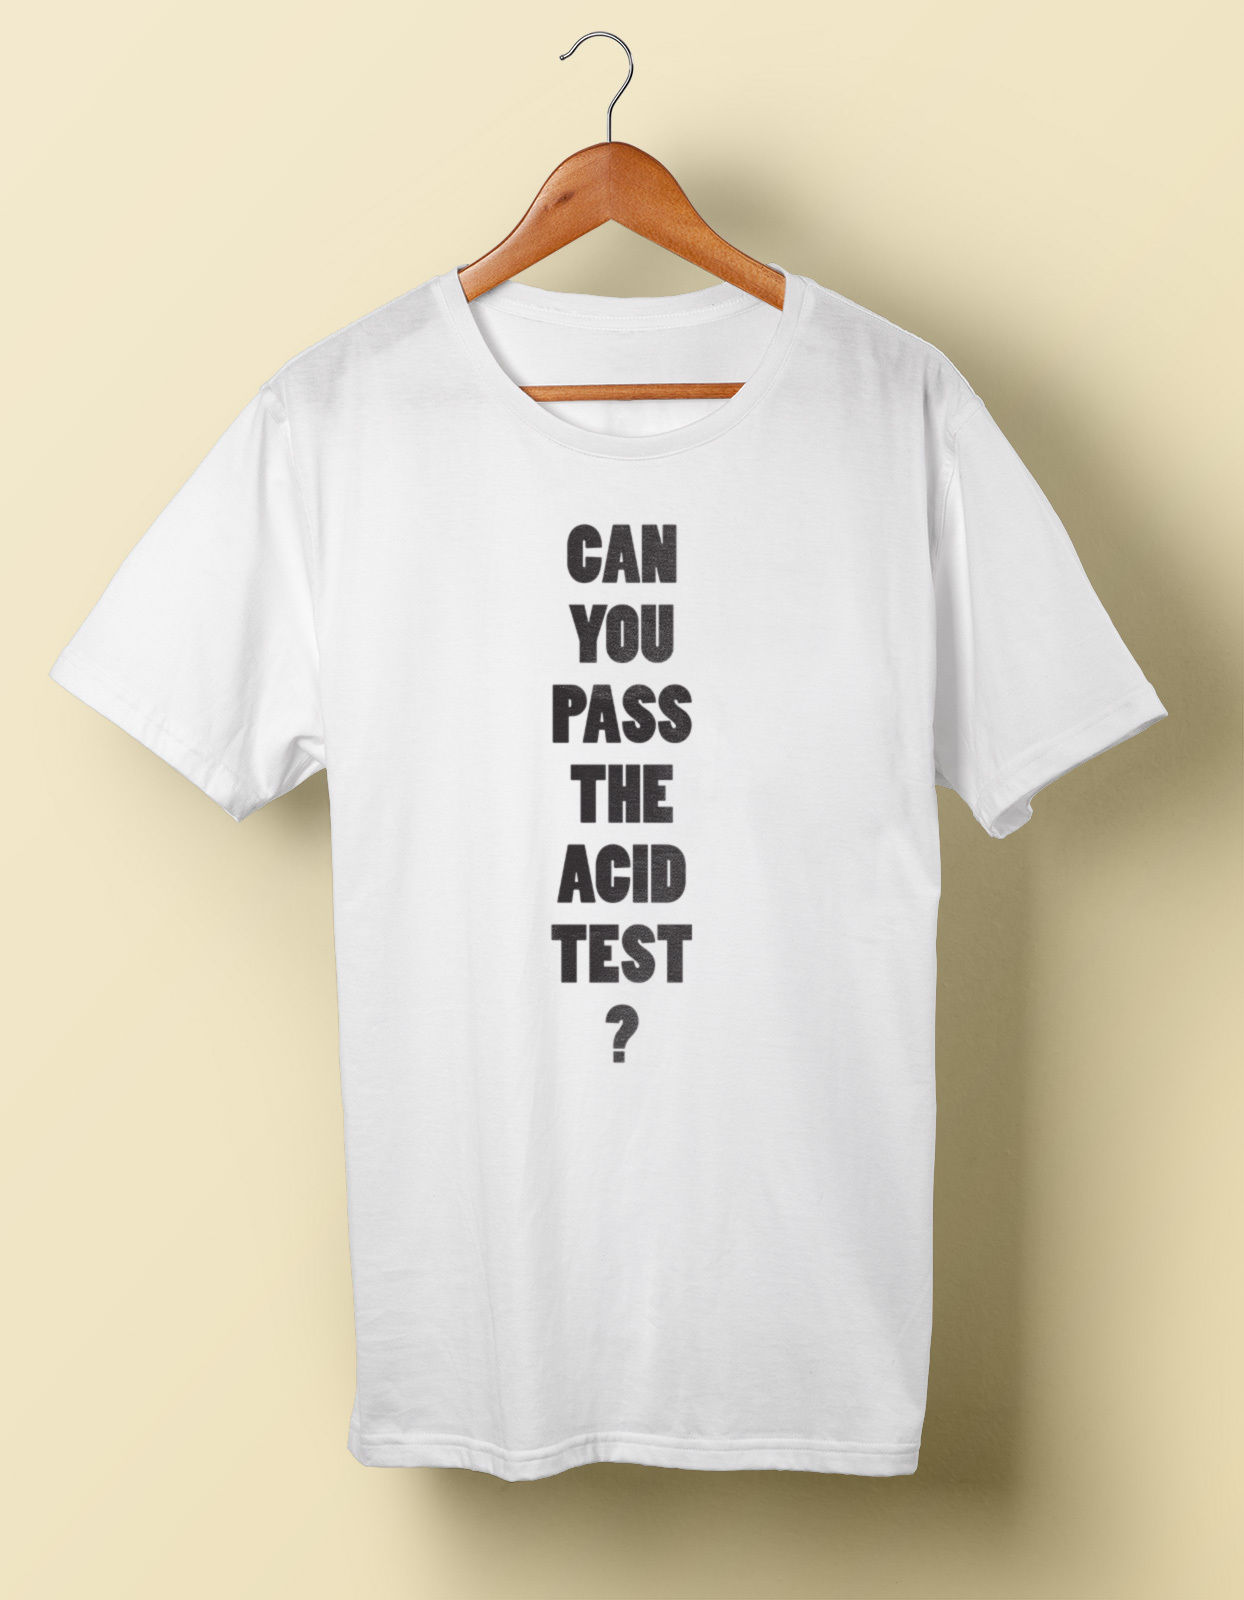 Can You Pass The Acid Test? – Prints Tees